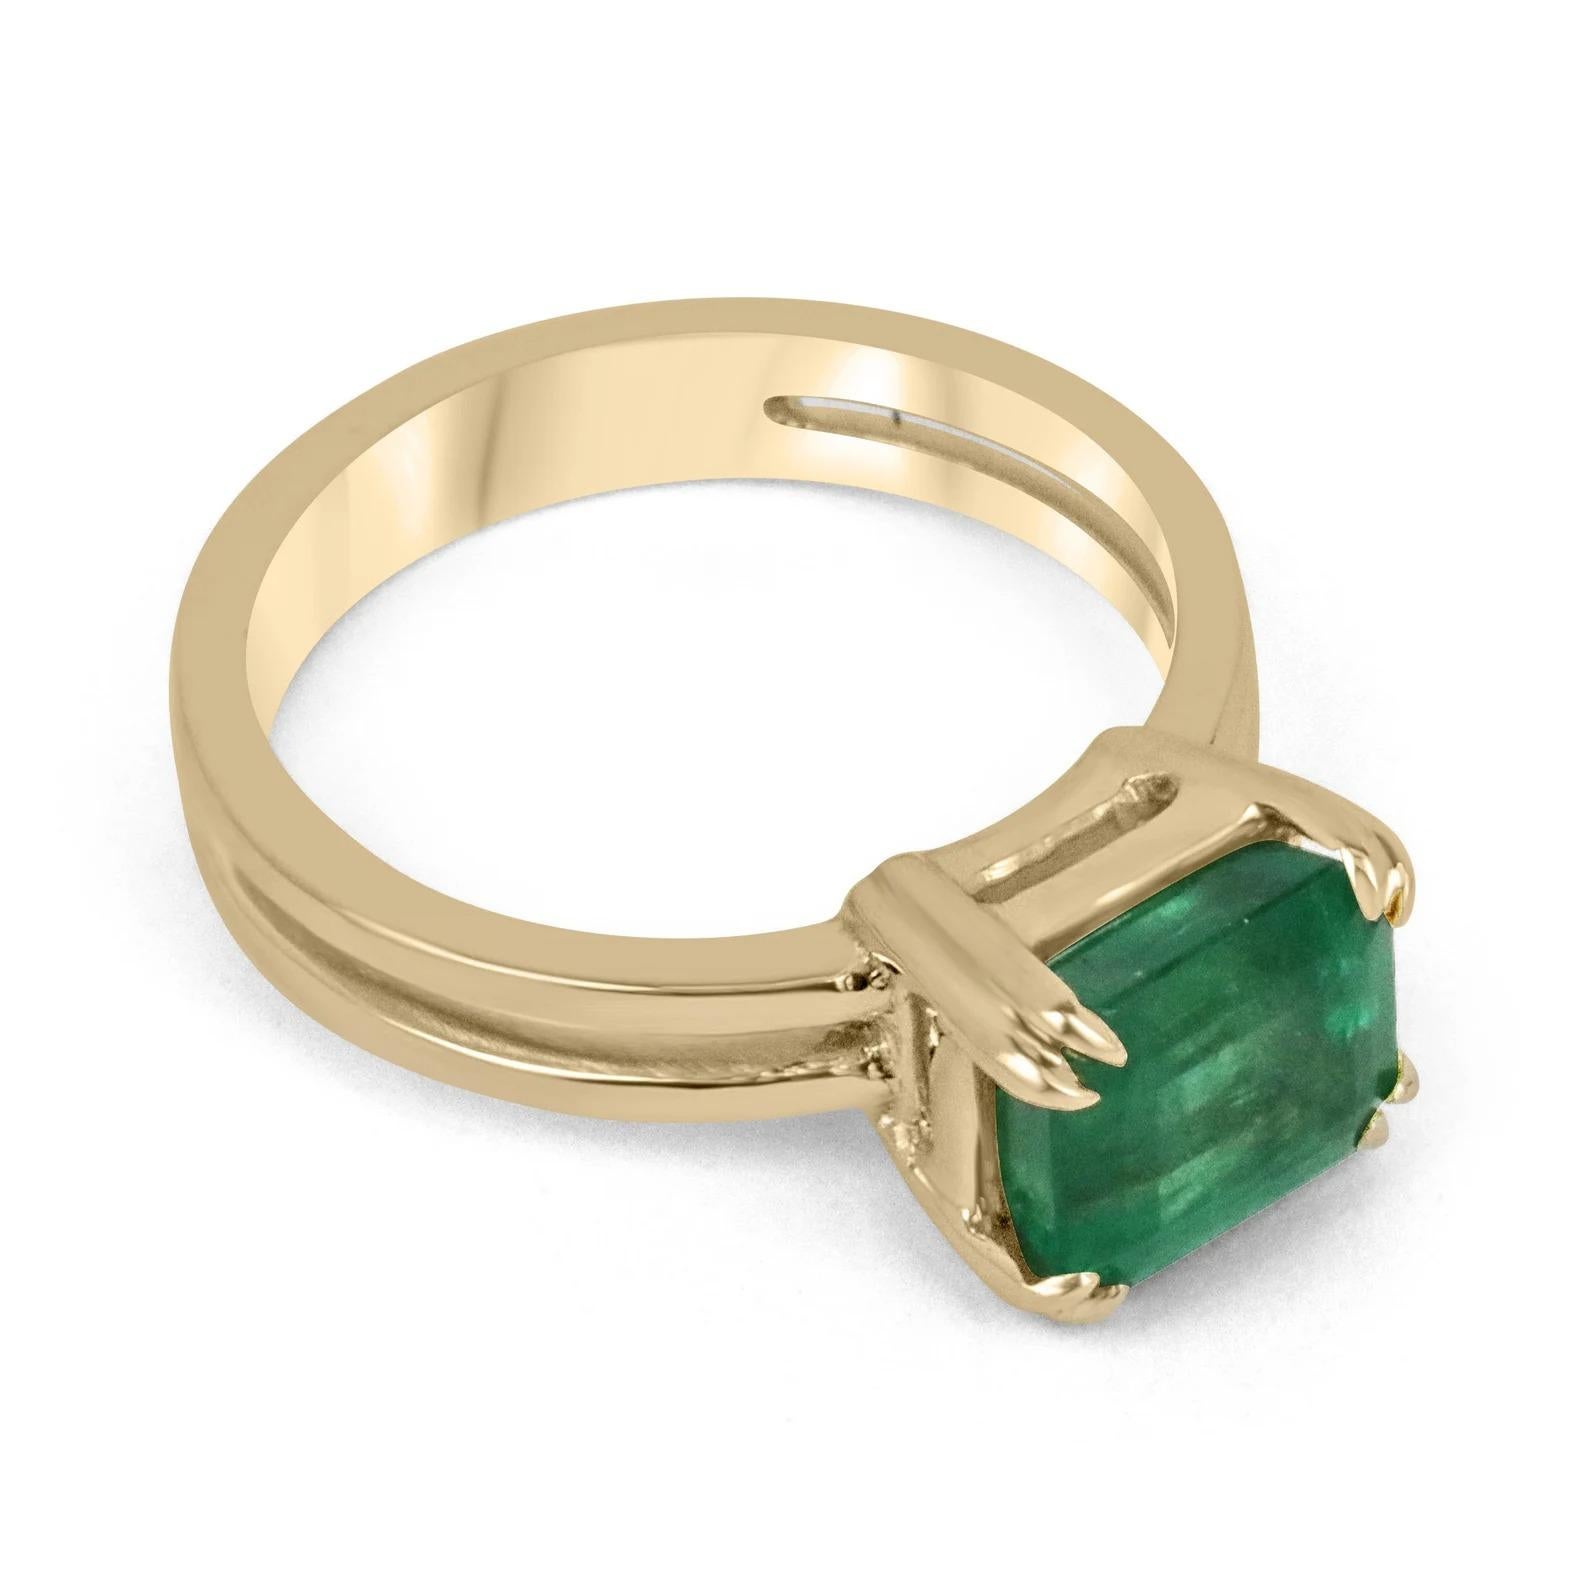 Displayed is a stunning East-to-West emerald solitaire engagement or right-hand ring in 14K yellow gold. This gorgeous solitaire ring carries a 2.68-carat emerald in a double-prong setting. Fully faceted, this gemstone showcases excellent shine and